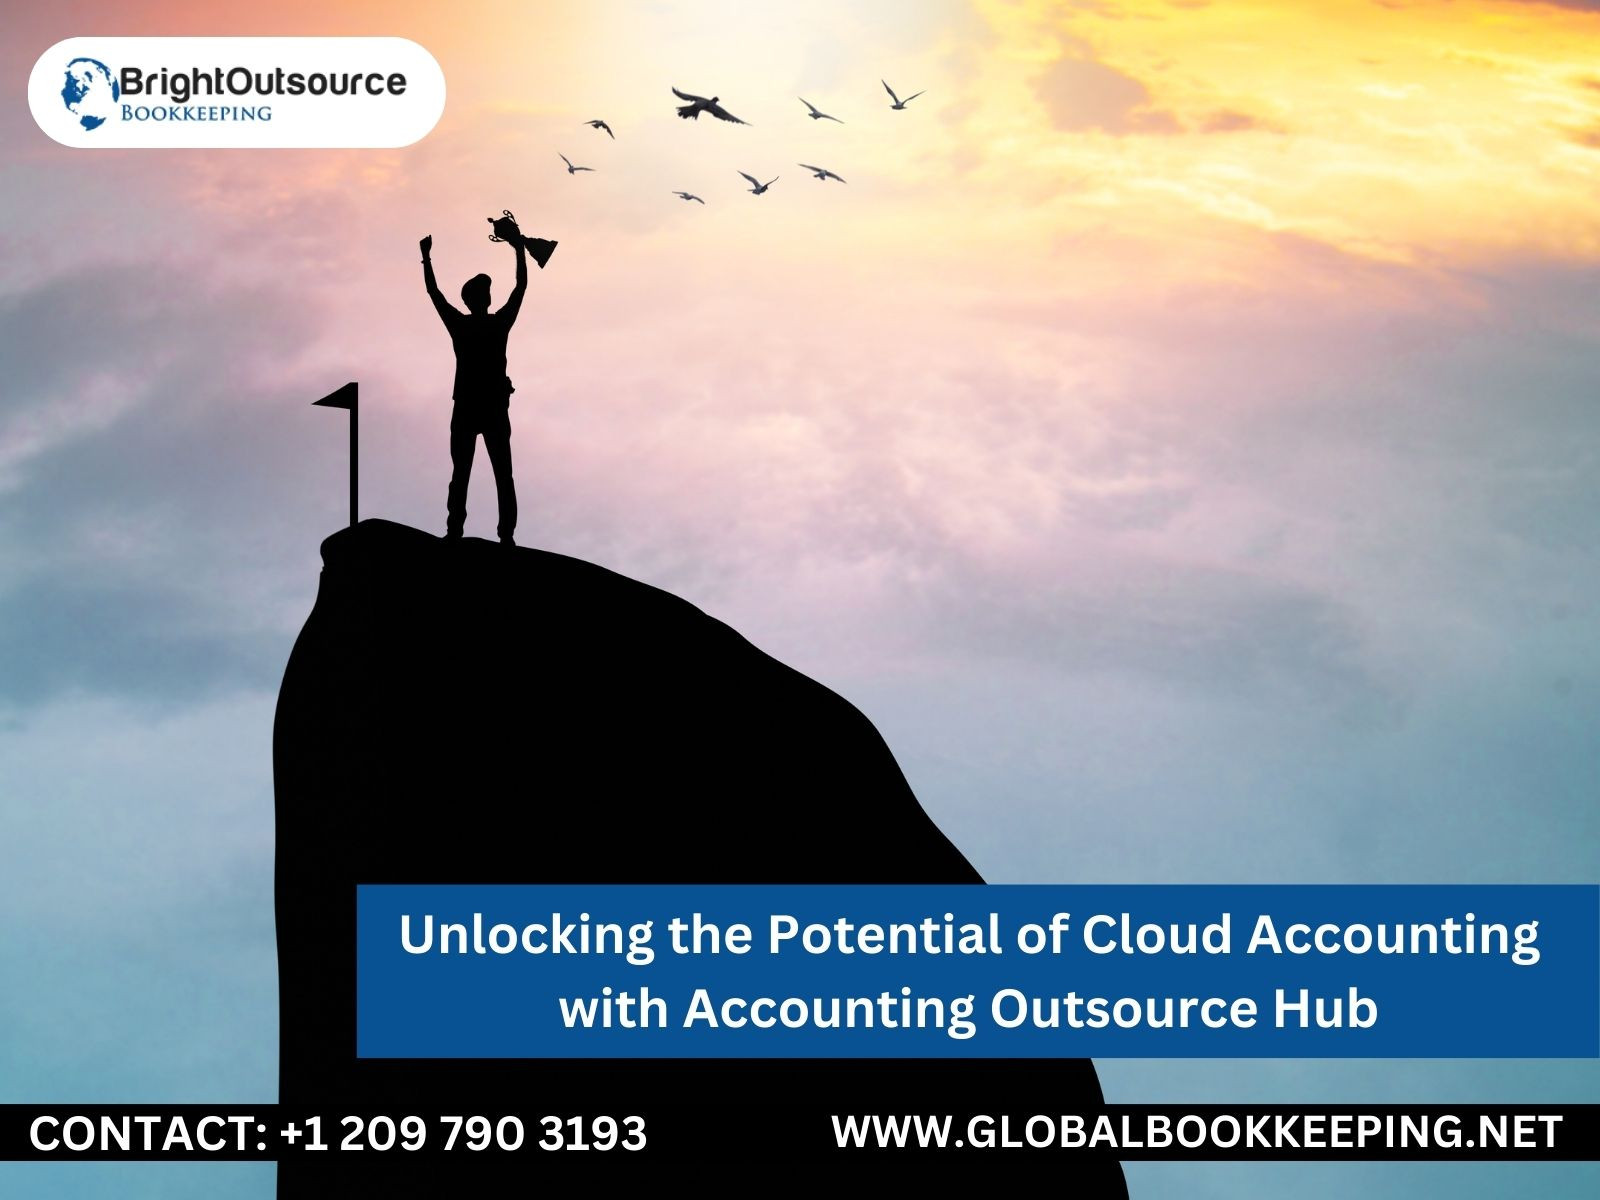 Unlocking the Potential of Cloud Accounting with Accounting Outsource Hub